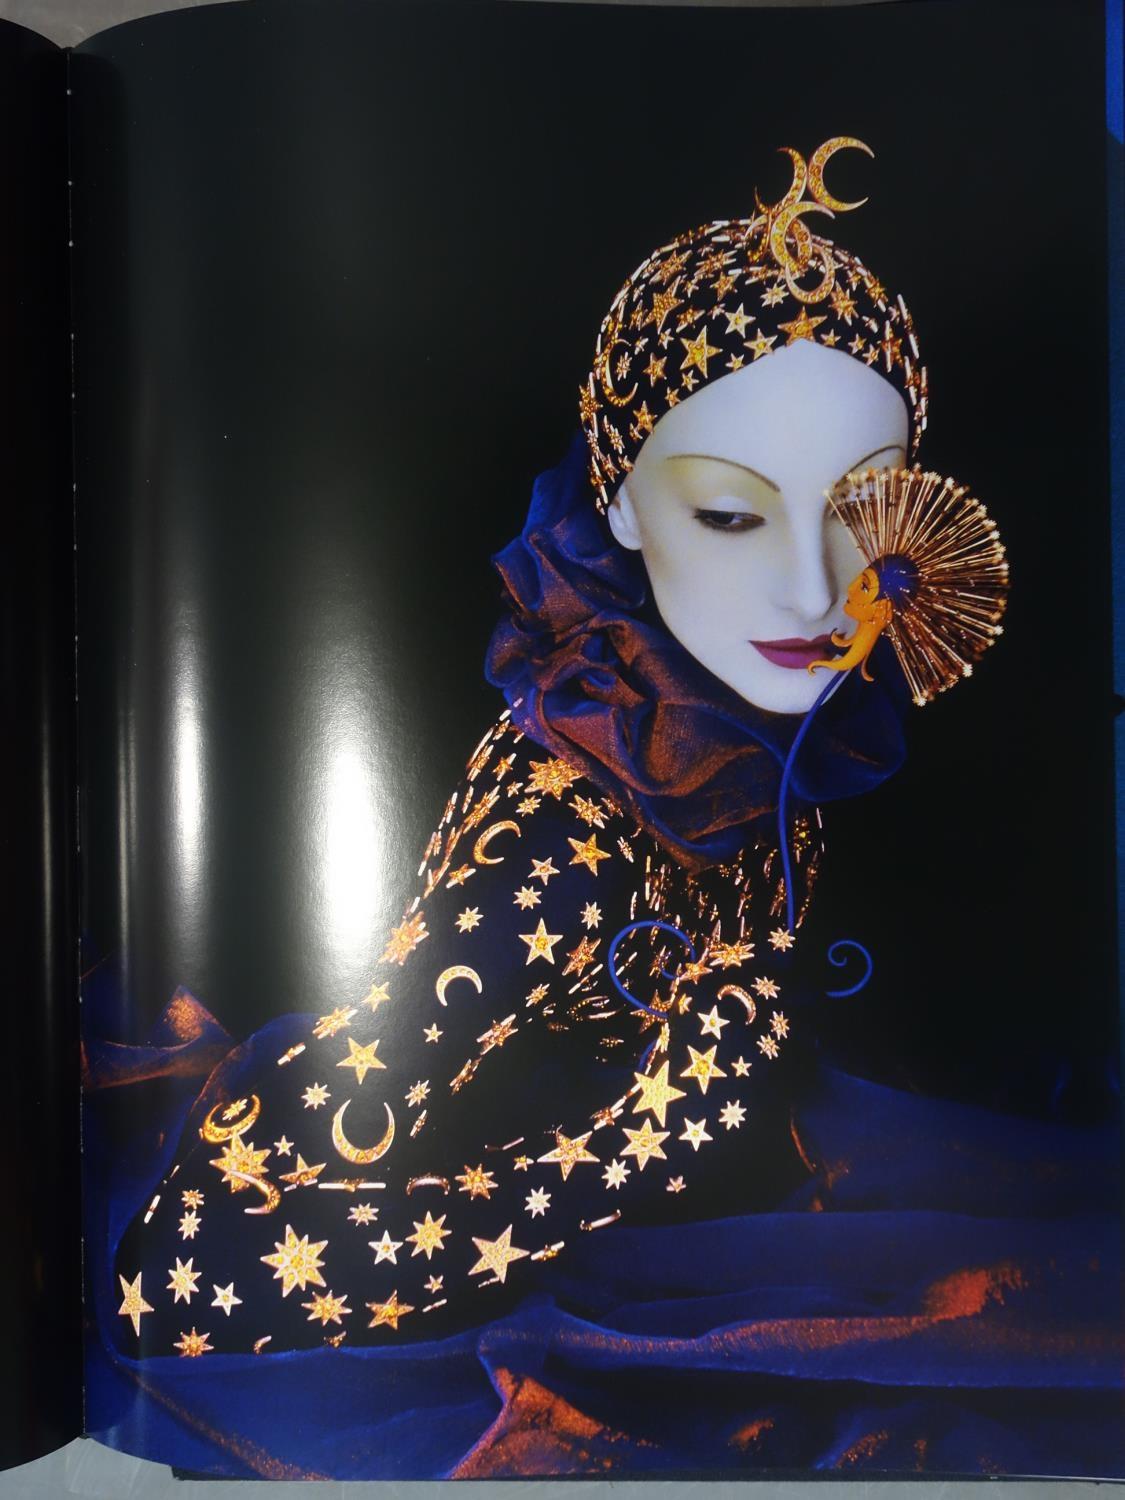 A Serge Lutens hard back book of illustrations, published by Assouline, with dust cover - Image 3 of 4